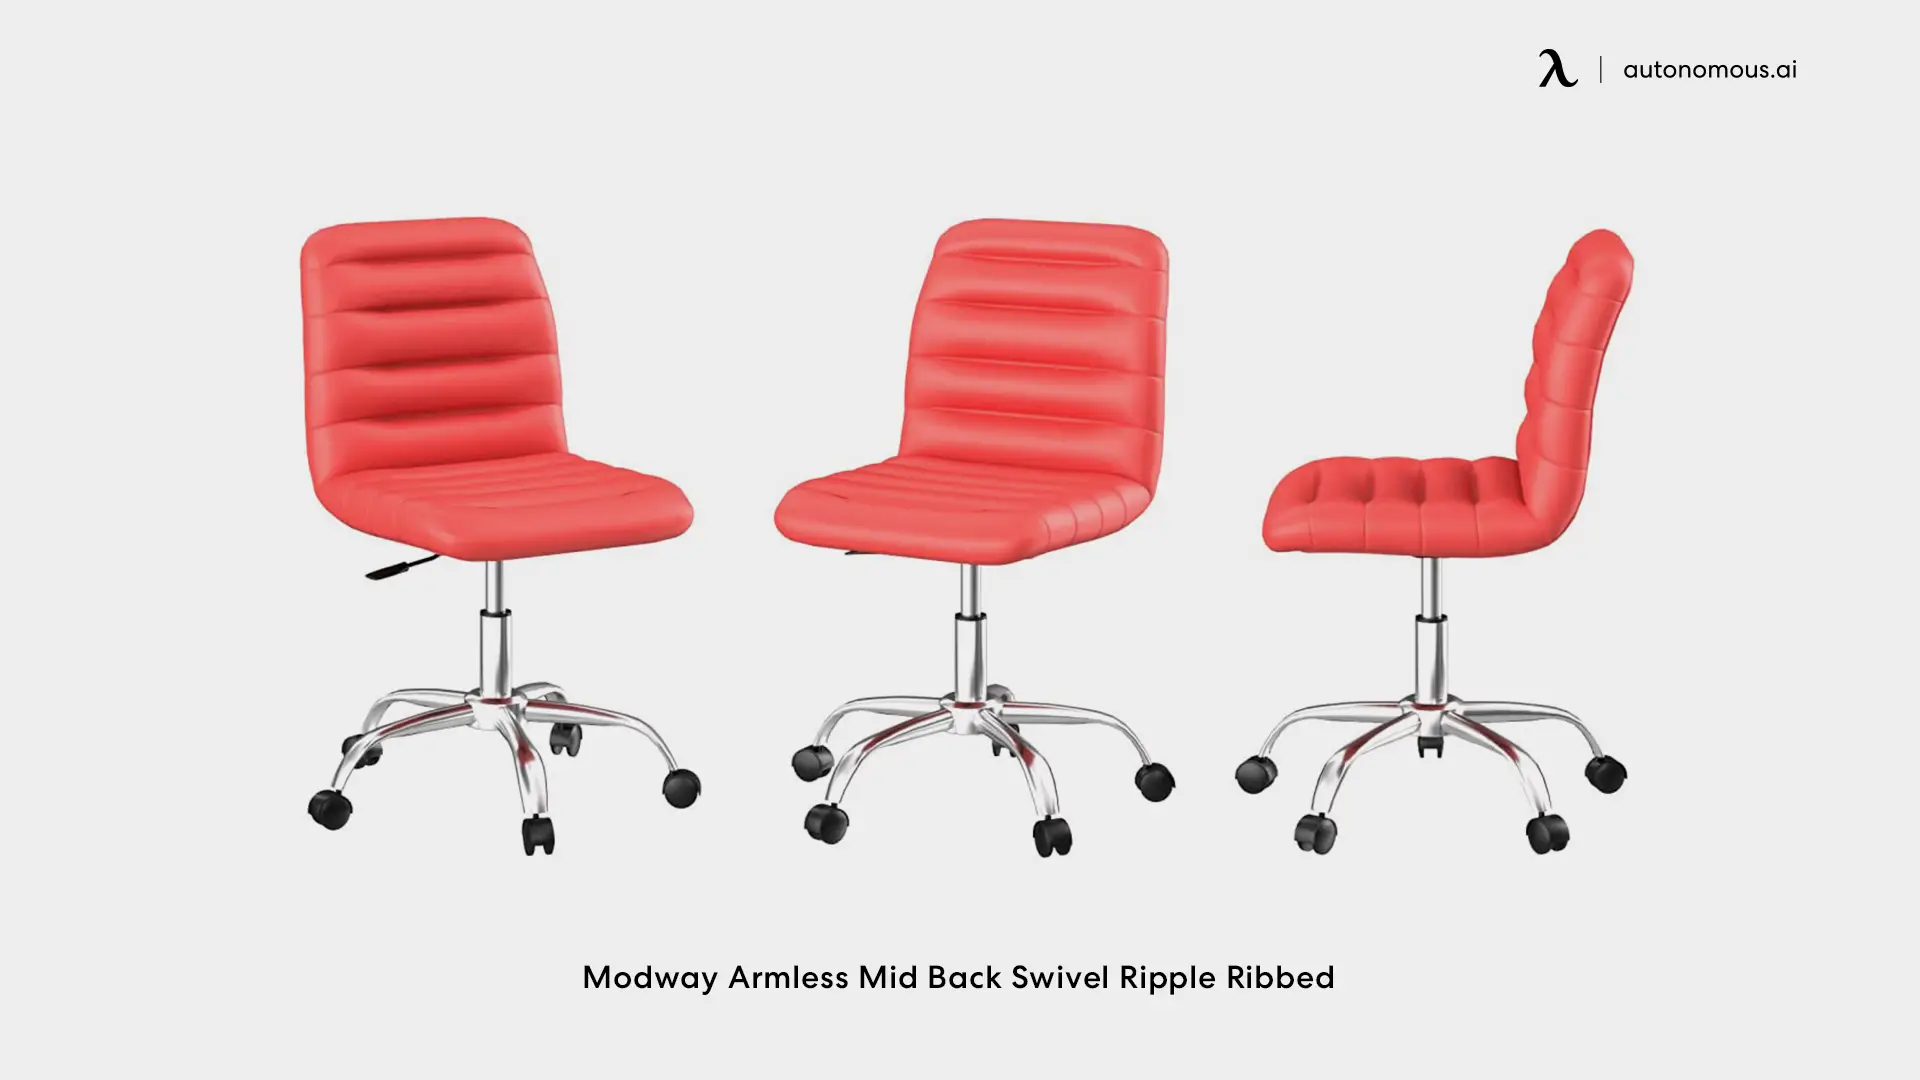 Modway Armless Mid Back Swivel Ripple Ribbed Red Computer Desk